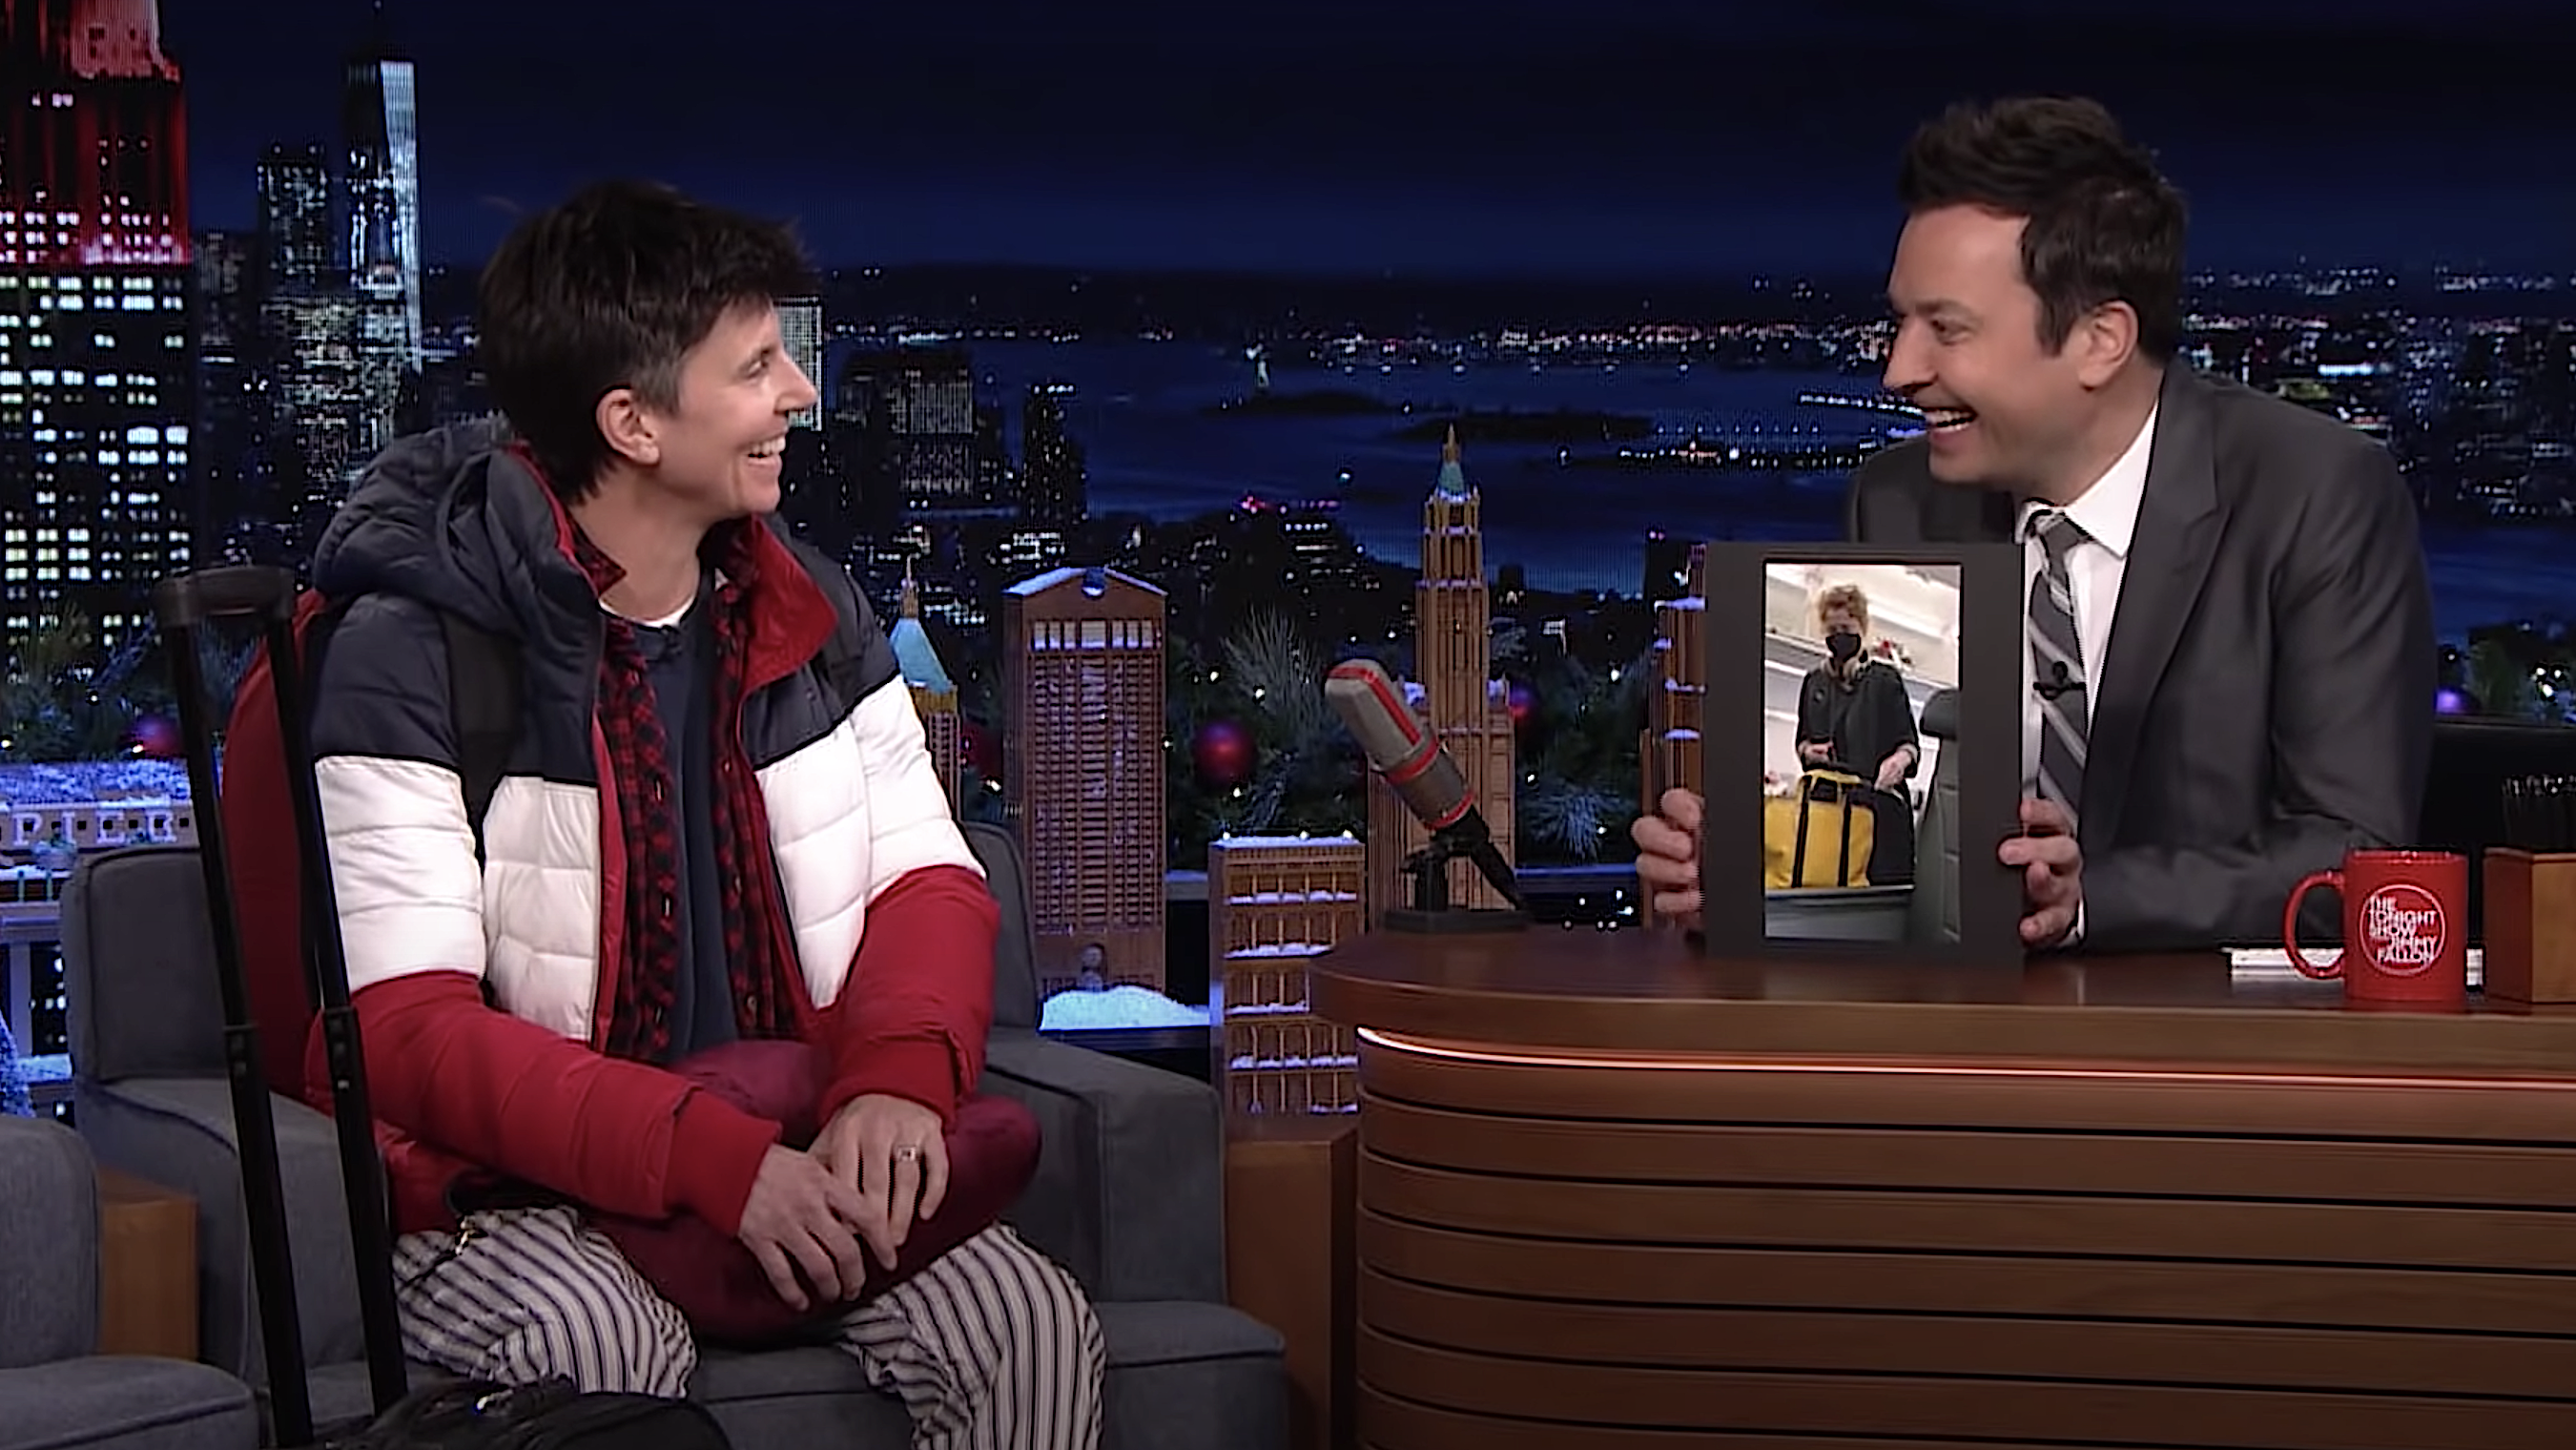 Tig Notaro stops back by The Tonight Show to finally ID the mystery celebrity on her flight